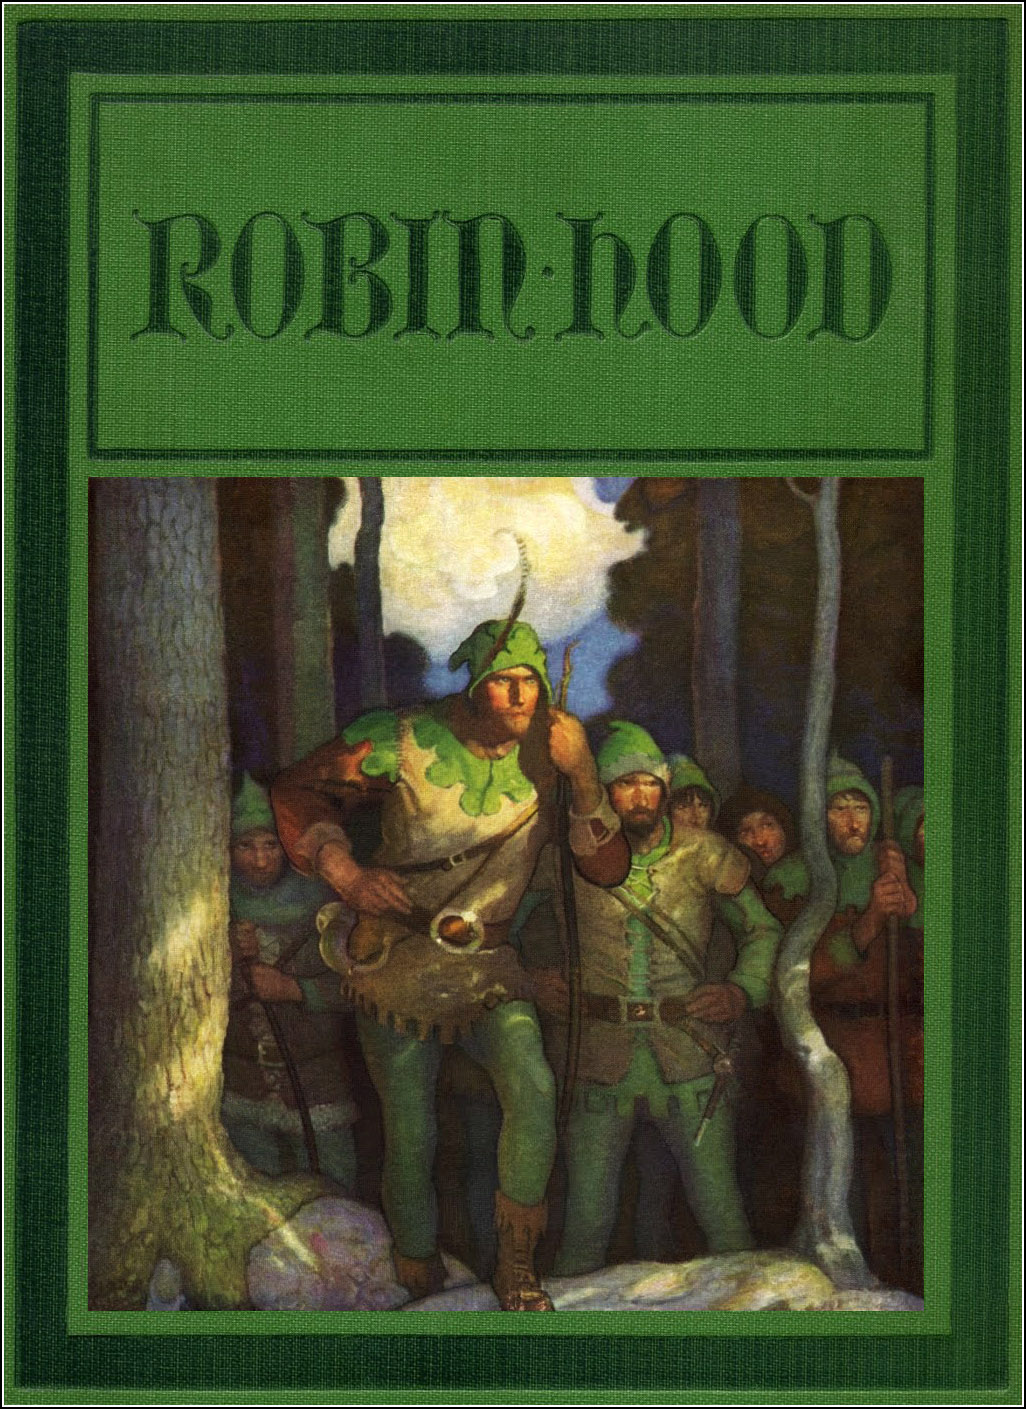 Unsorted pieces: Lincoln Green and Robin Hood